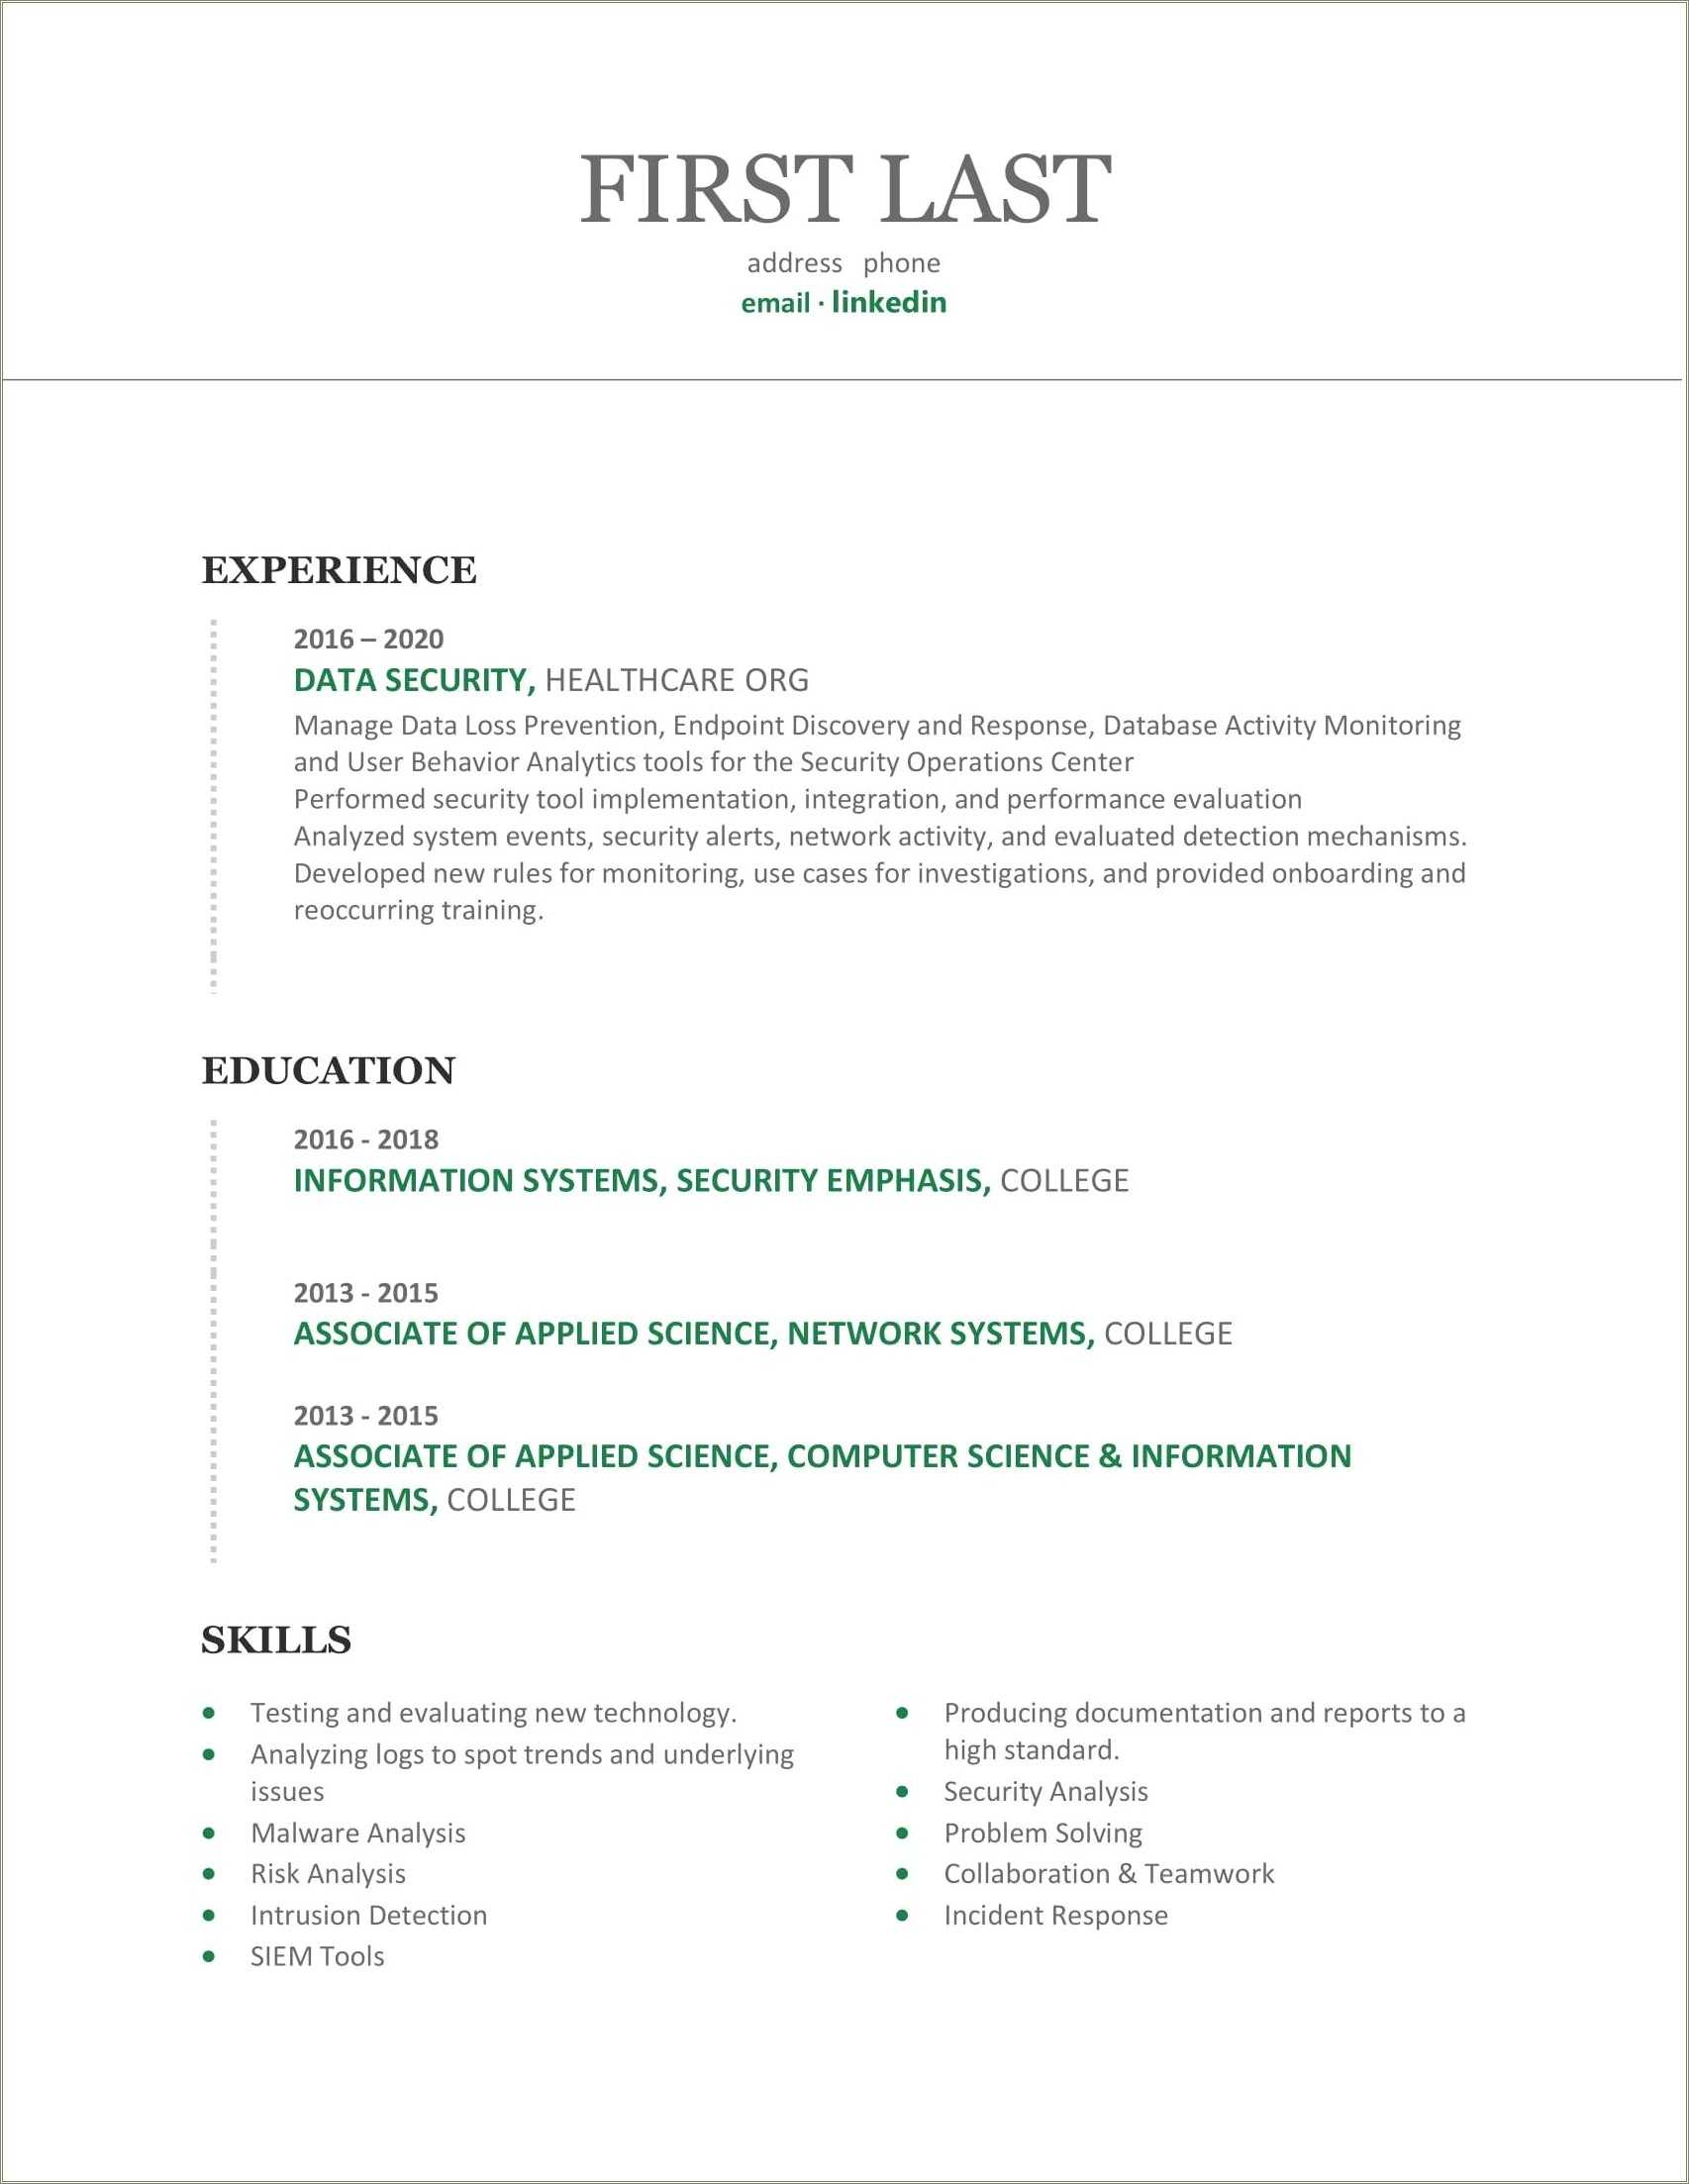 Cyber Security Analyst Project Based Resume Sample